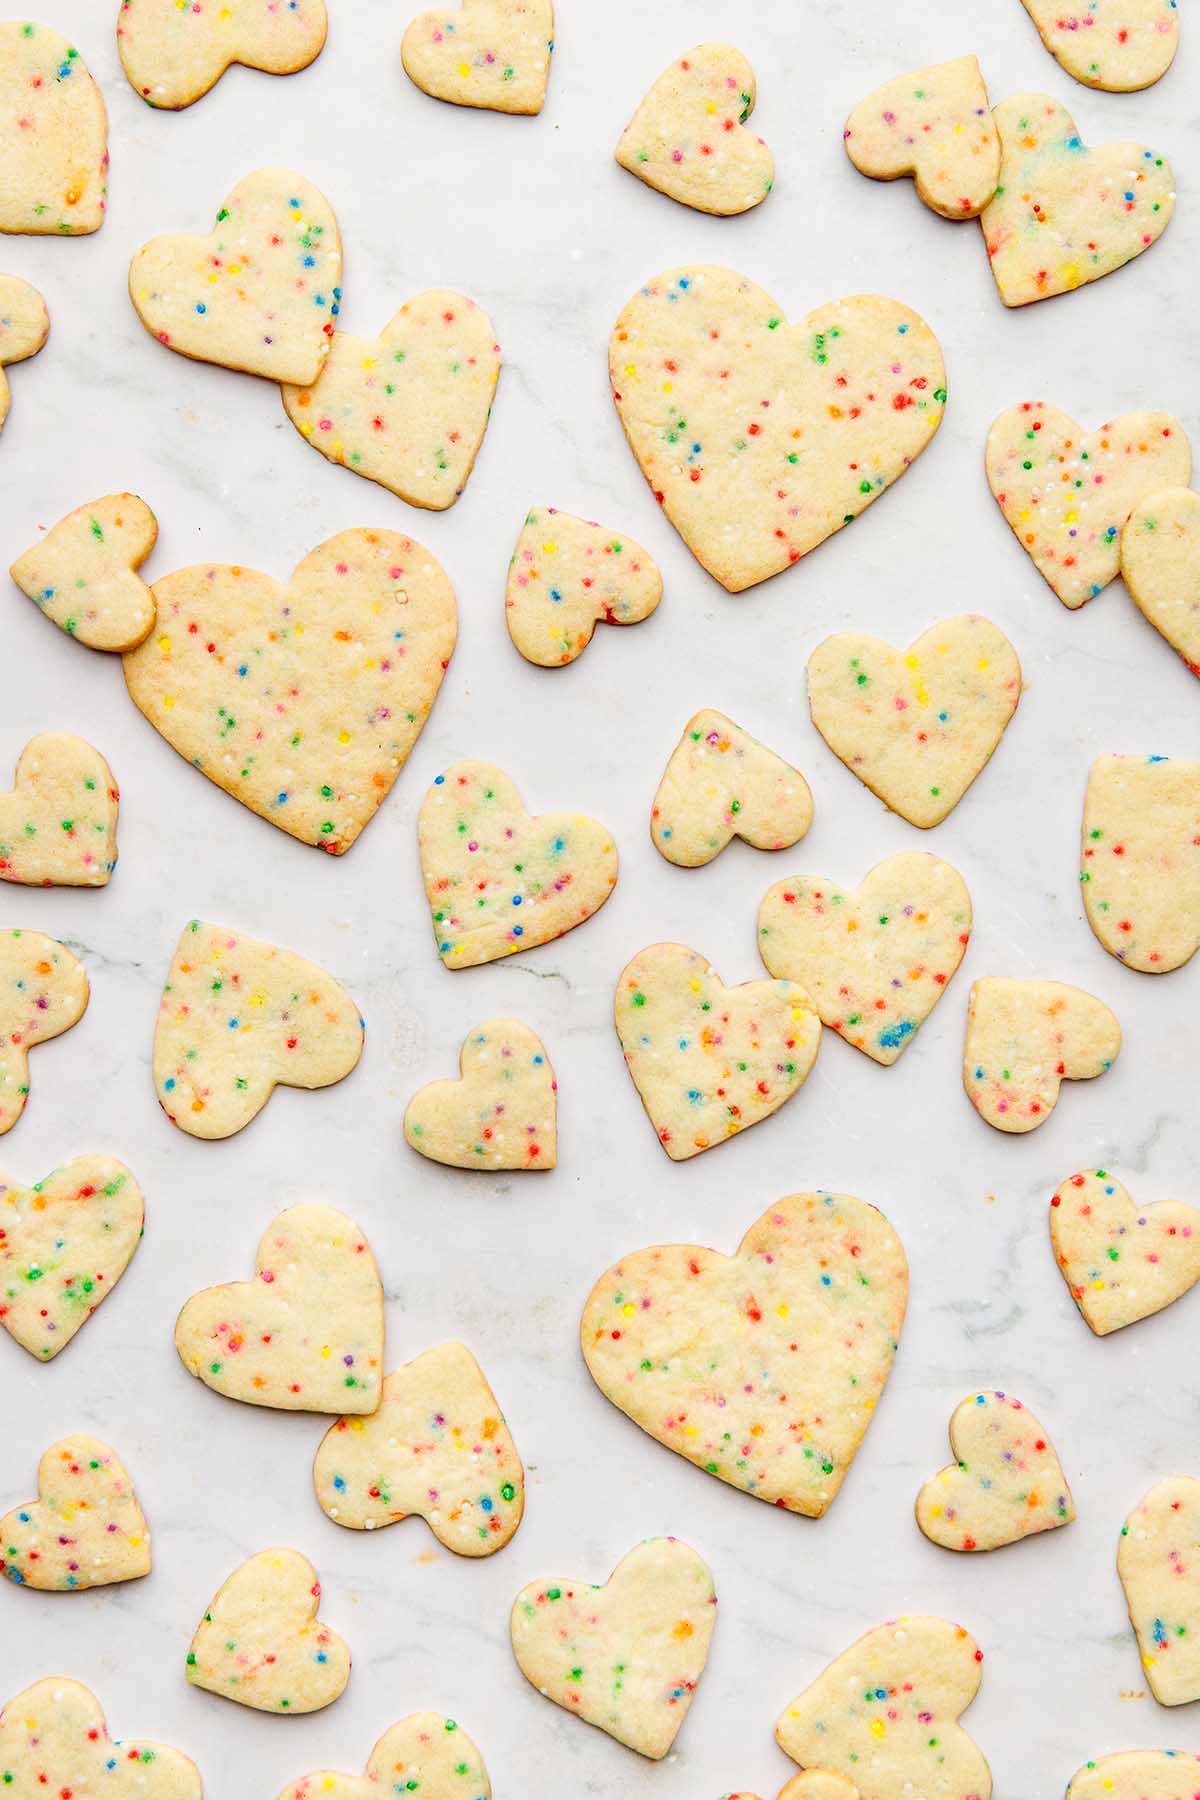 Sugar cookies with sprinkles scattered over a marble surface.